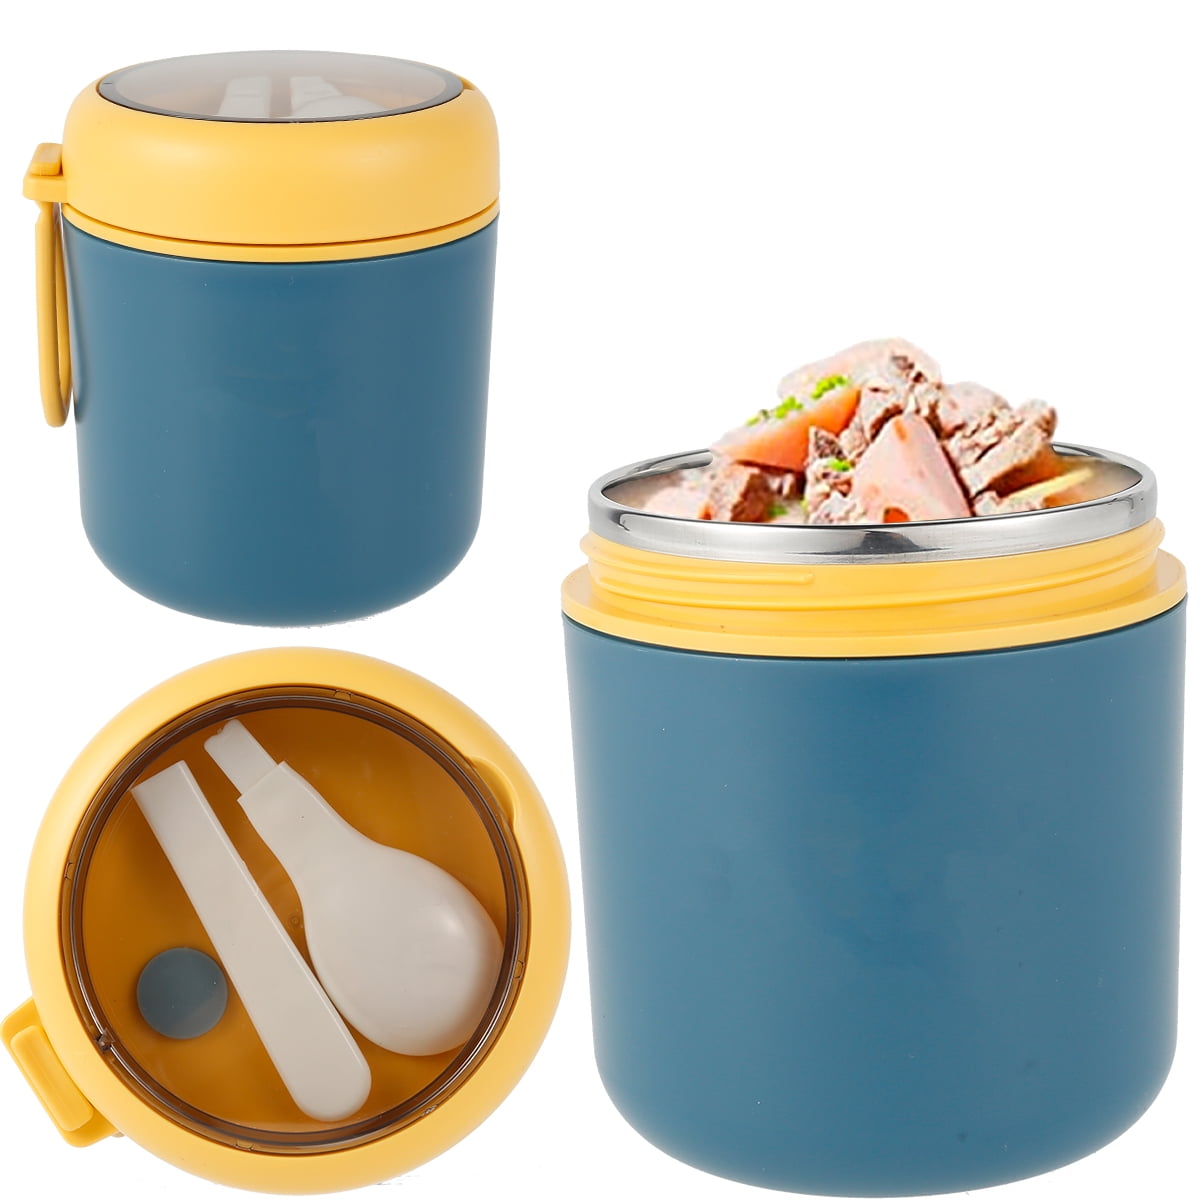 WAKSOX Insulated Food Flask Soup Food Container, 730ML Insulated